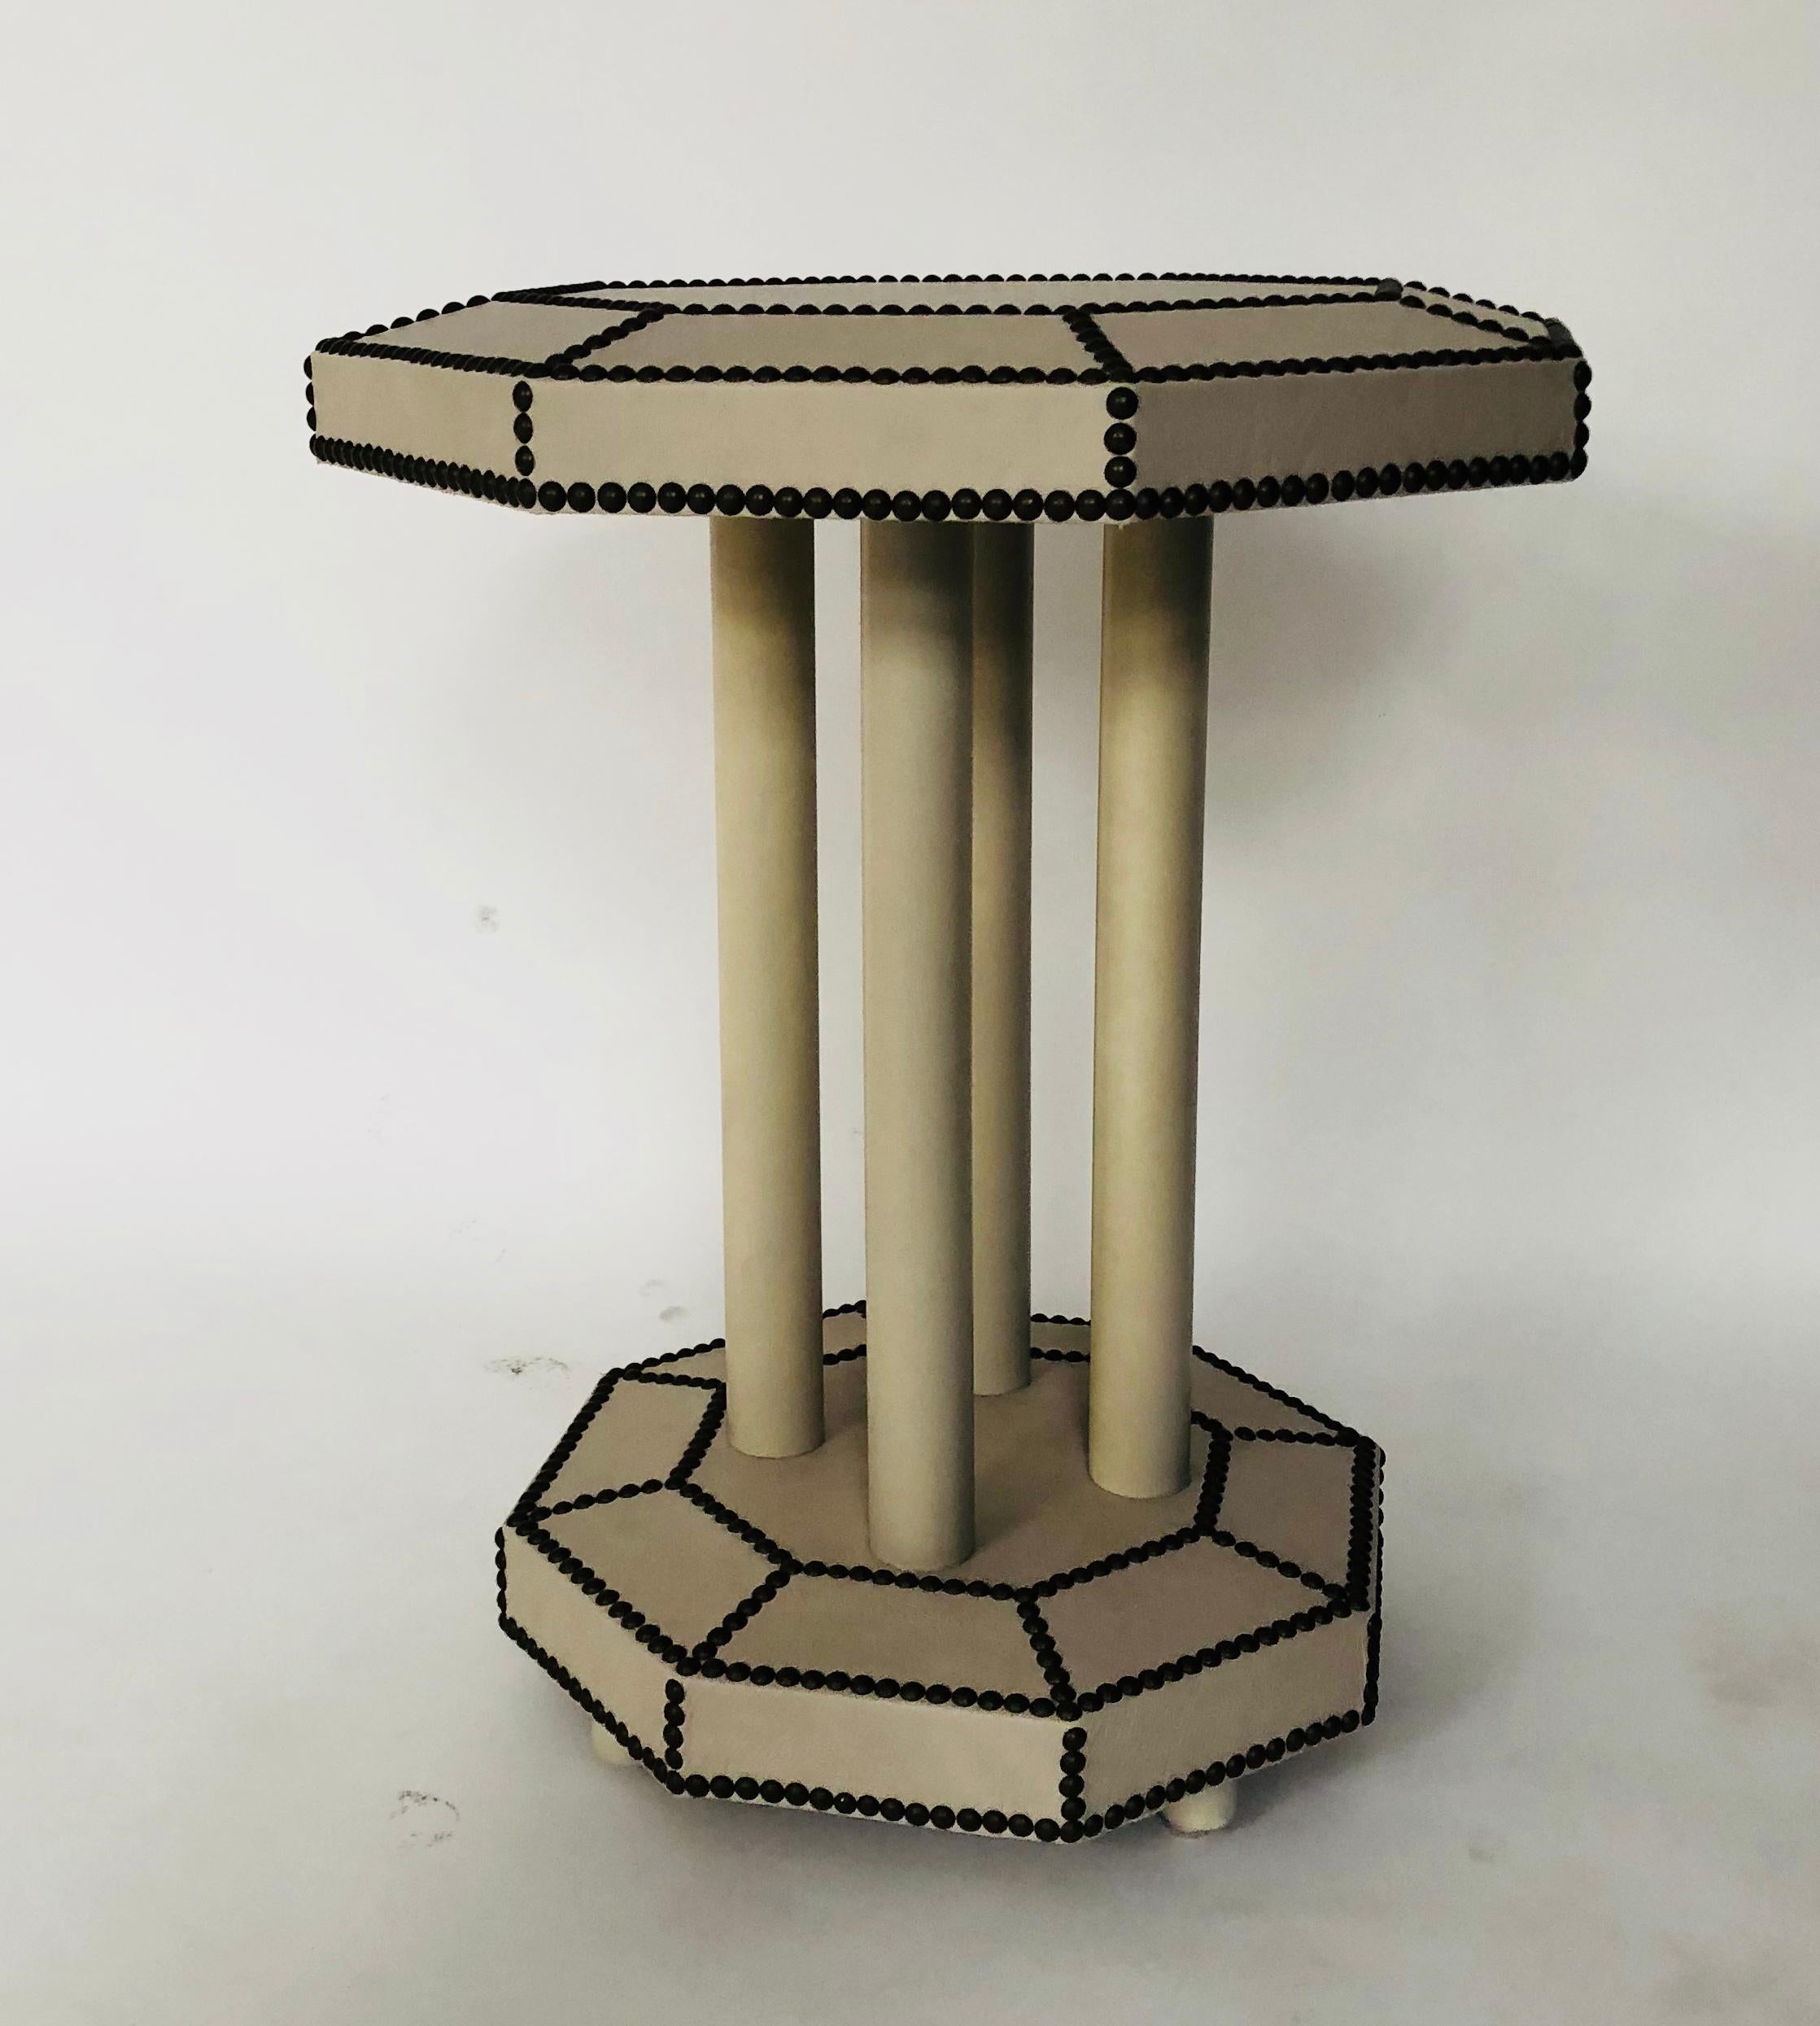 Leather tops give these octagonal side tables their sophisticated style. The nailheads define and highlight the bevelled edges on both the top and bottom surfaces. The tables are perfect size for end tables, yet are customizable with numerous